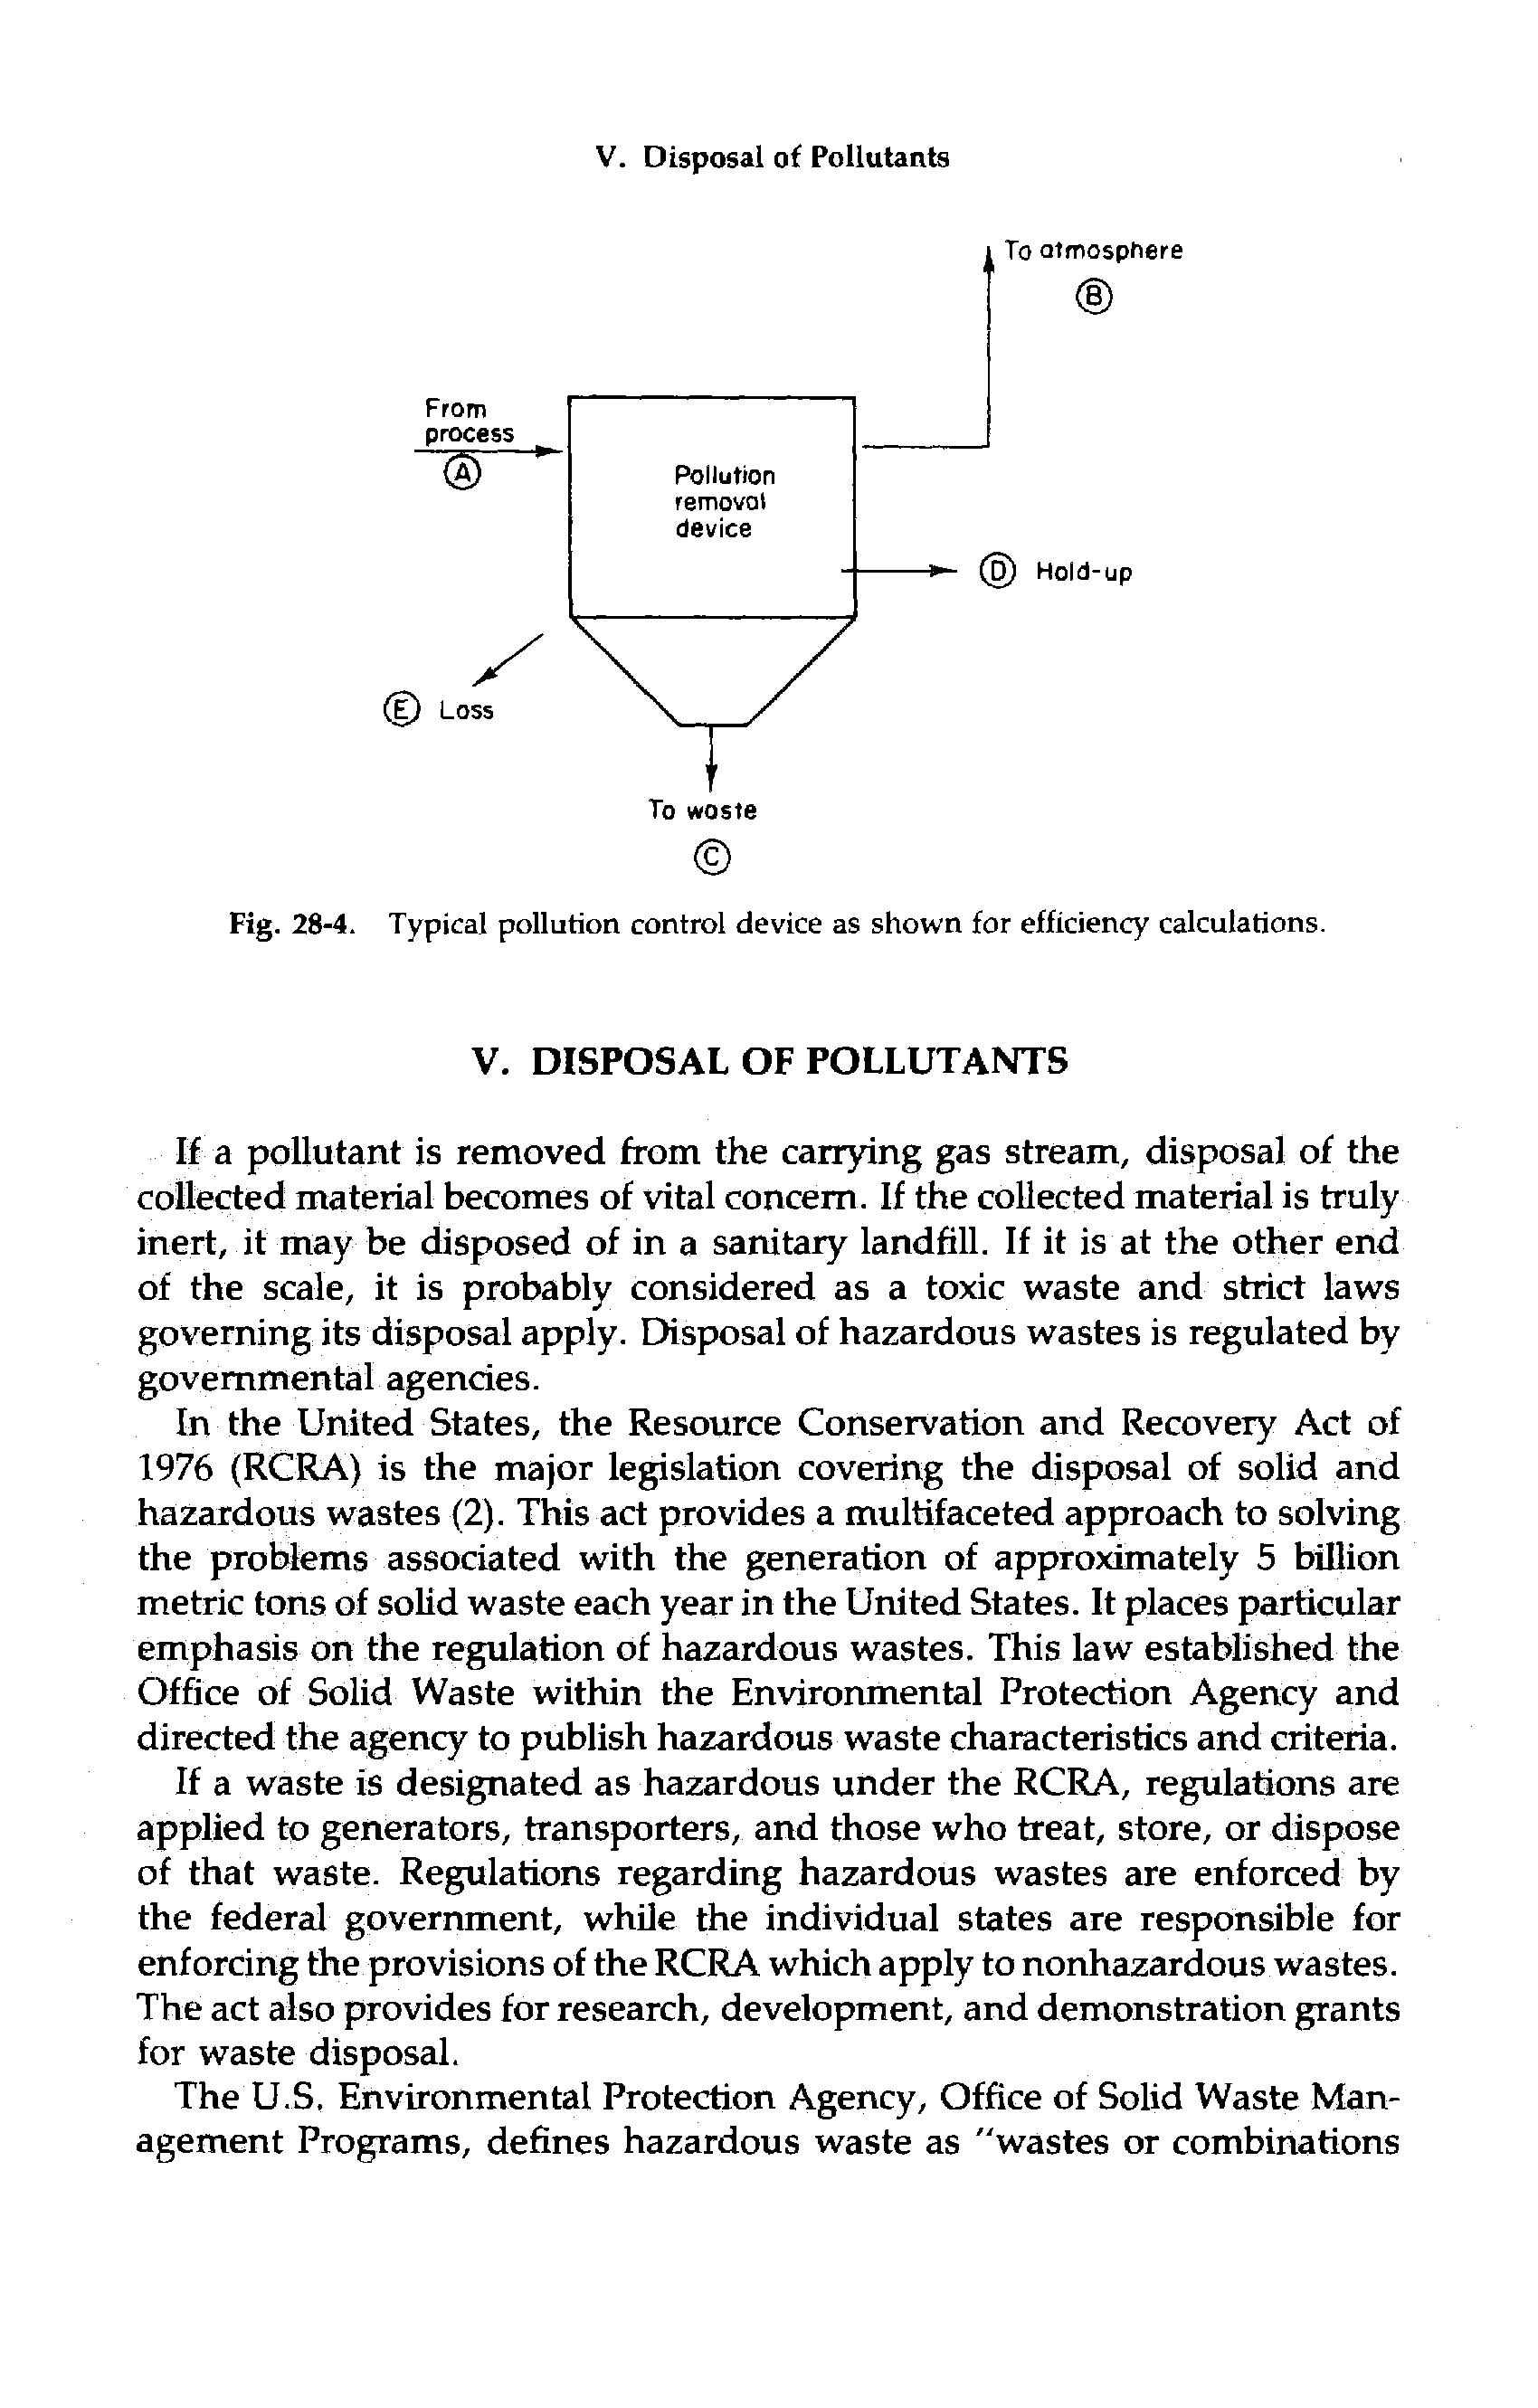 Fig. 28-4. Typical pollution control device as shown for efficiency calculations.